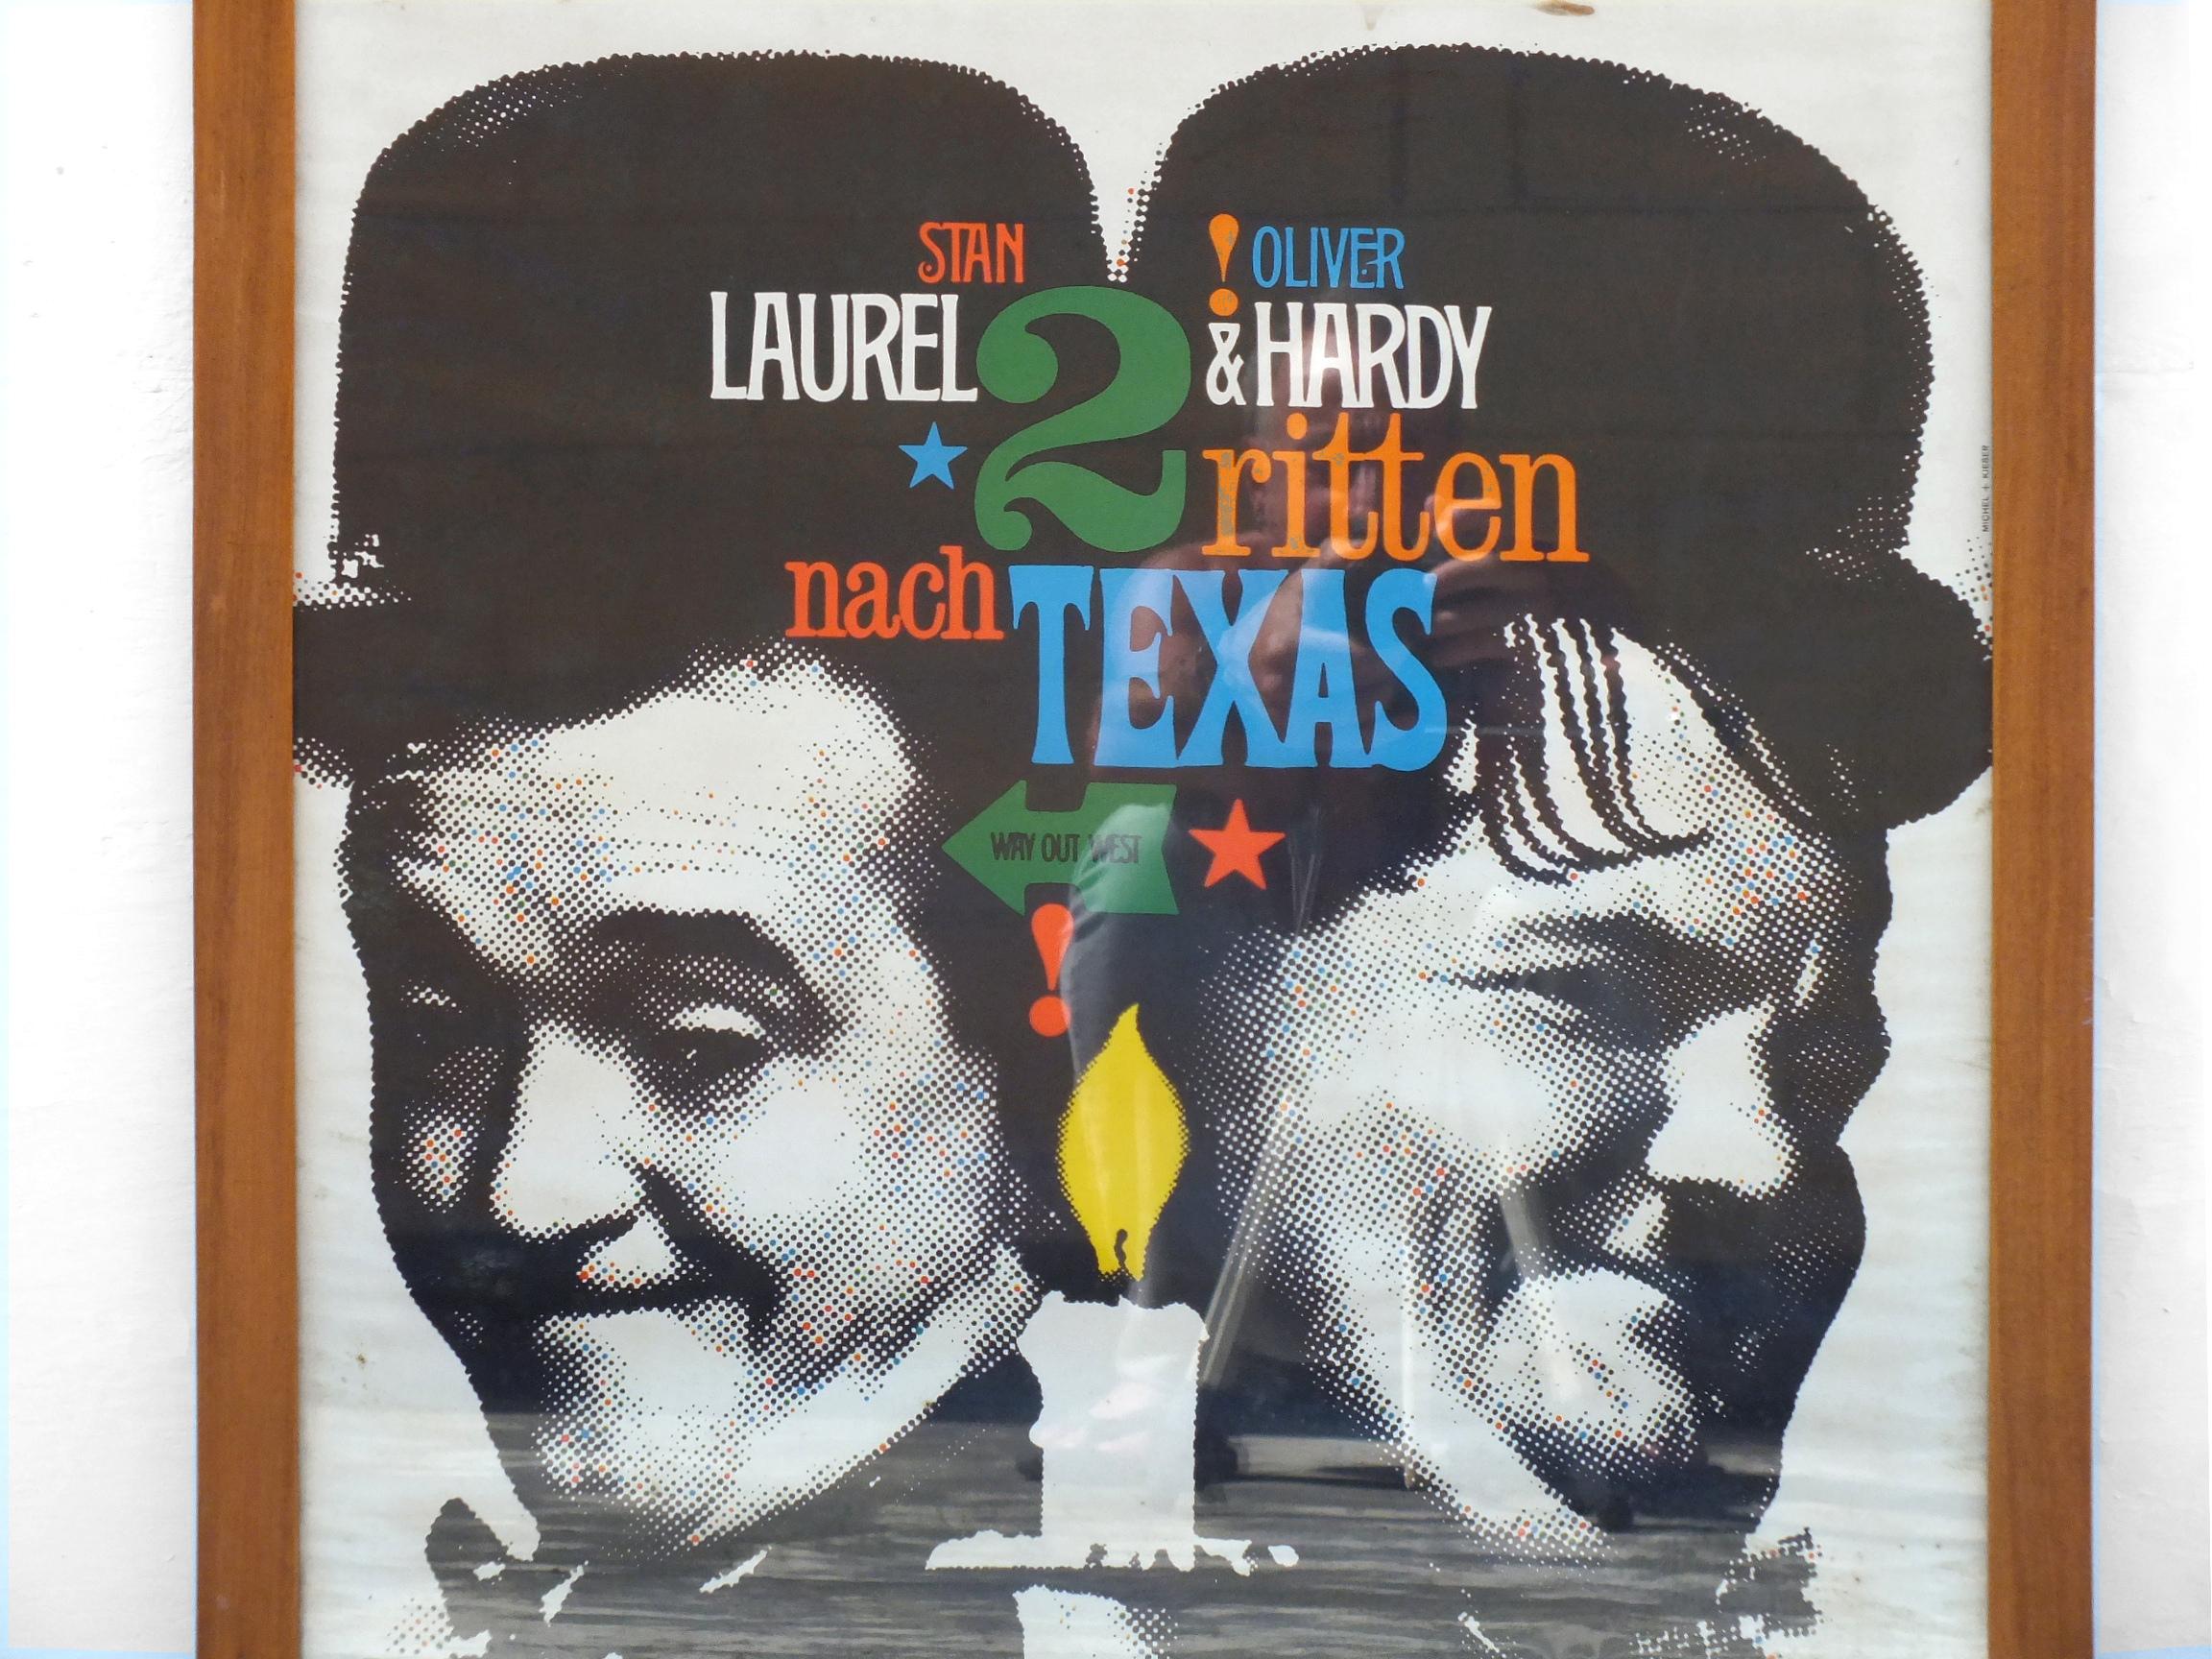 Stan Laurel & Oliver Hardy 2 ritten nach texas / Way Out West by Gunther Kieser & Hans Michel years '60,  Fsk freigegeben movie

the poster has an elegant frame in wood and is in used good condition with sign of age and is original of the period